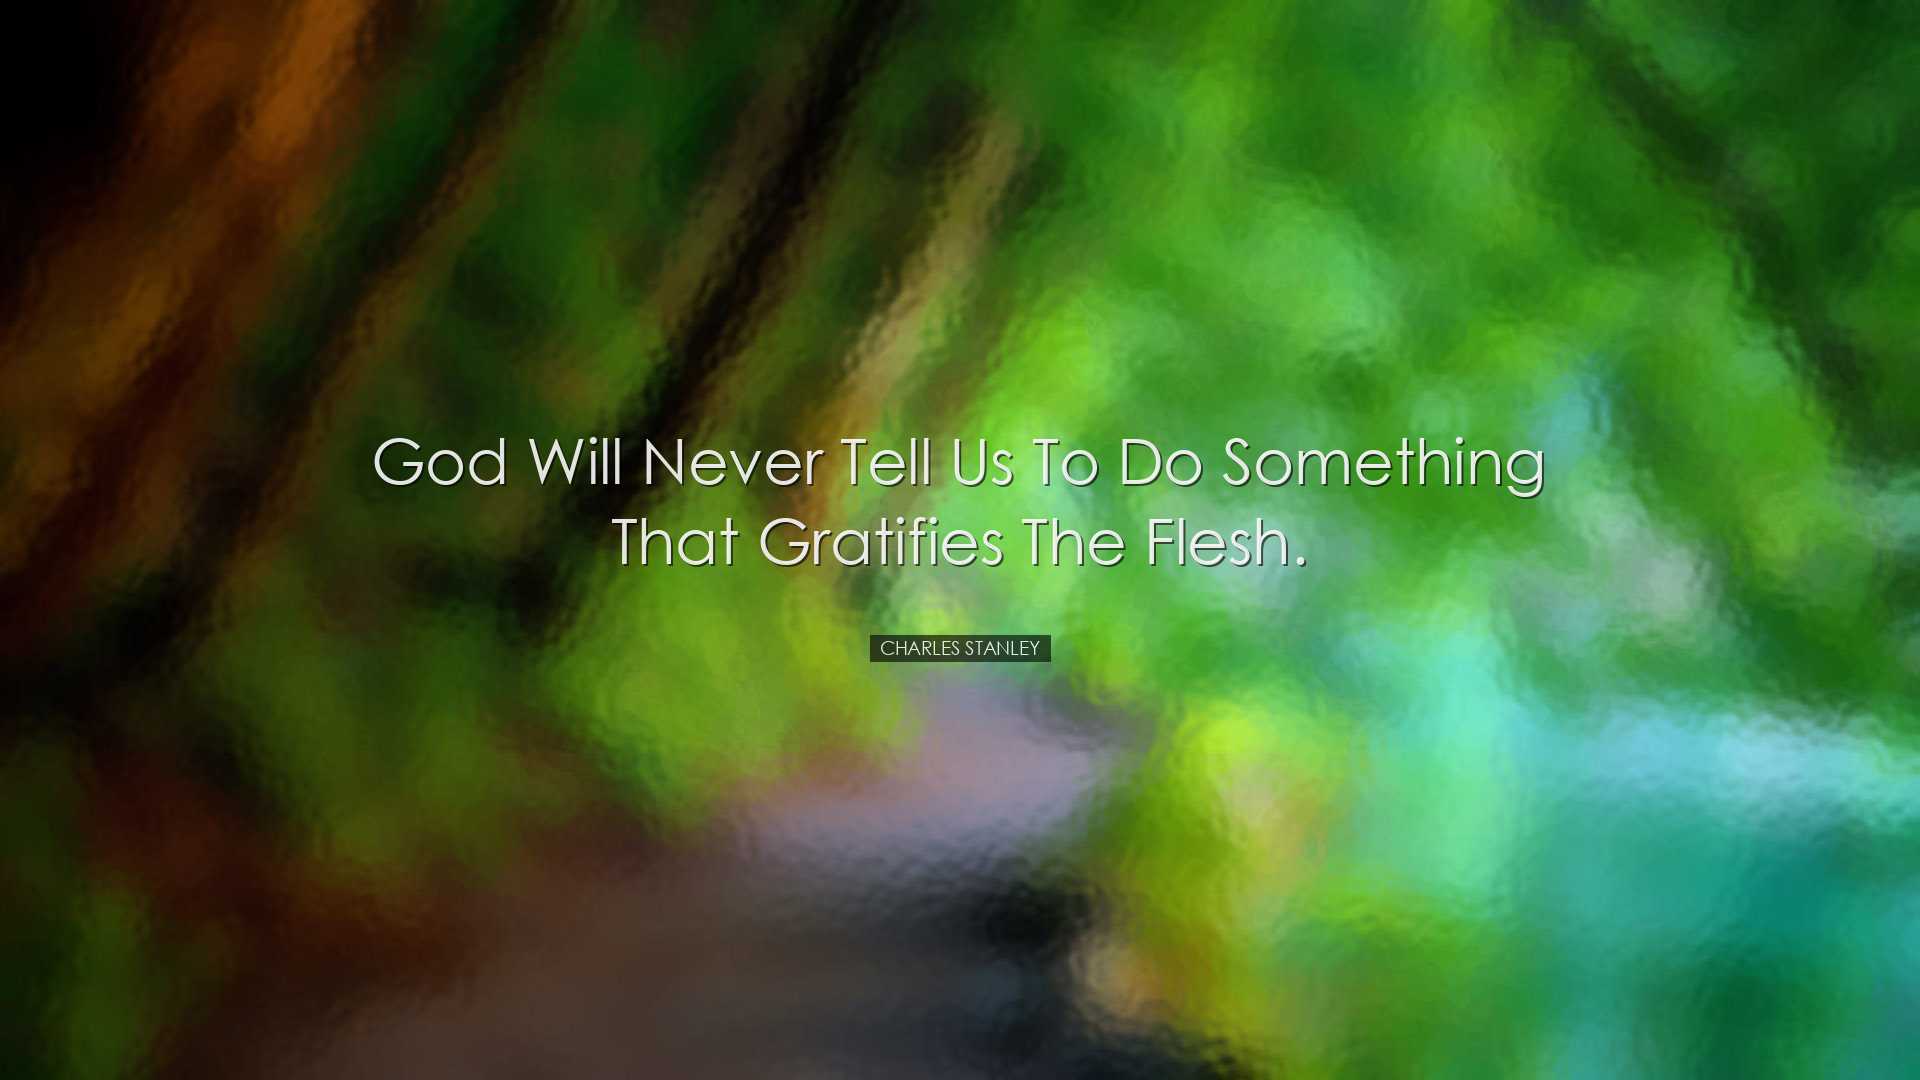 God will never tell us to do something that gratifies the flesh. -